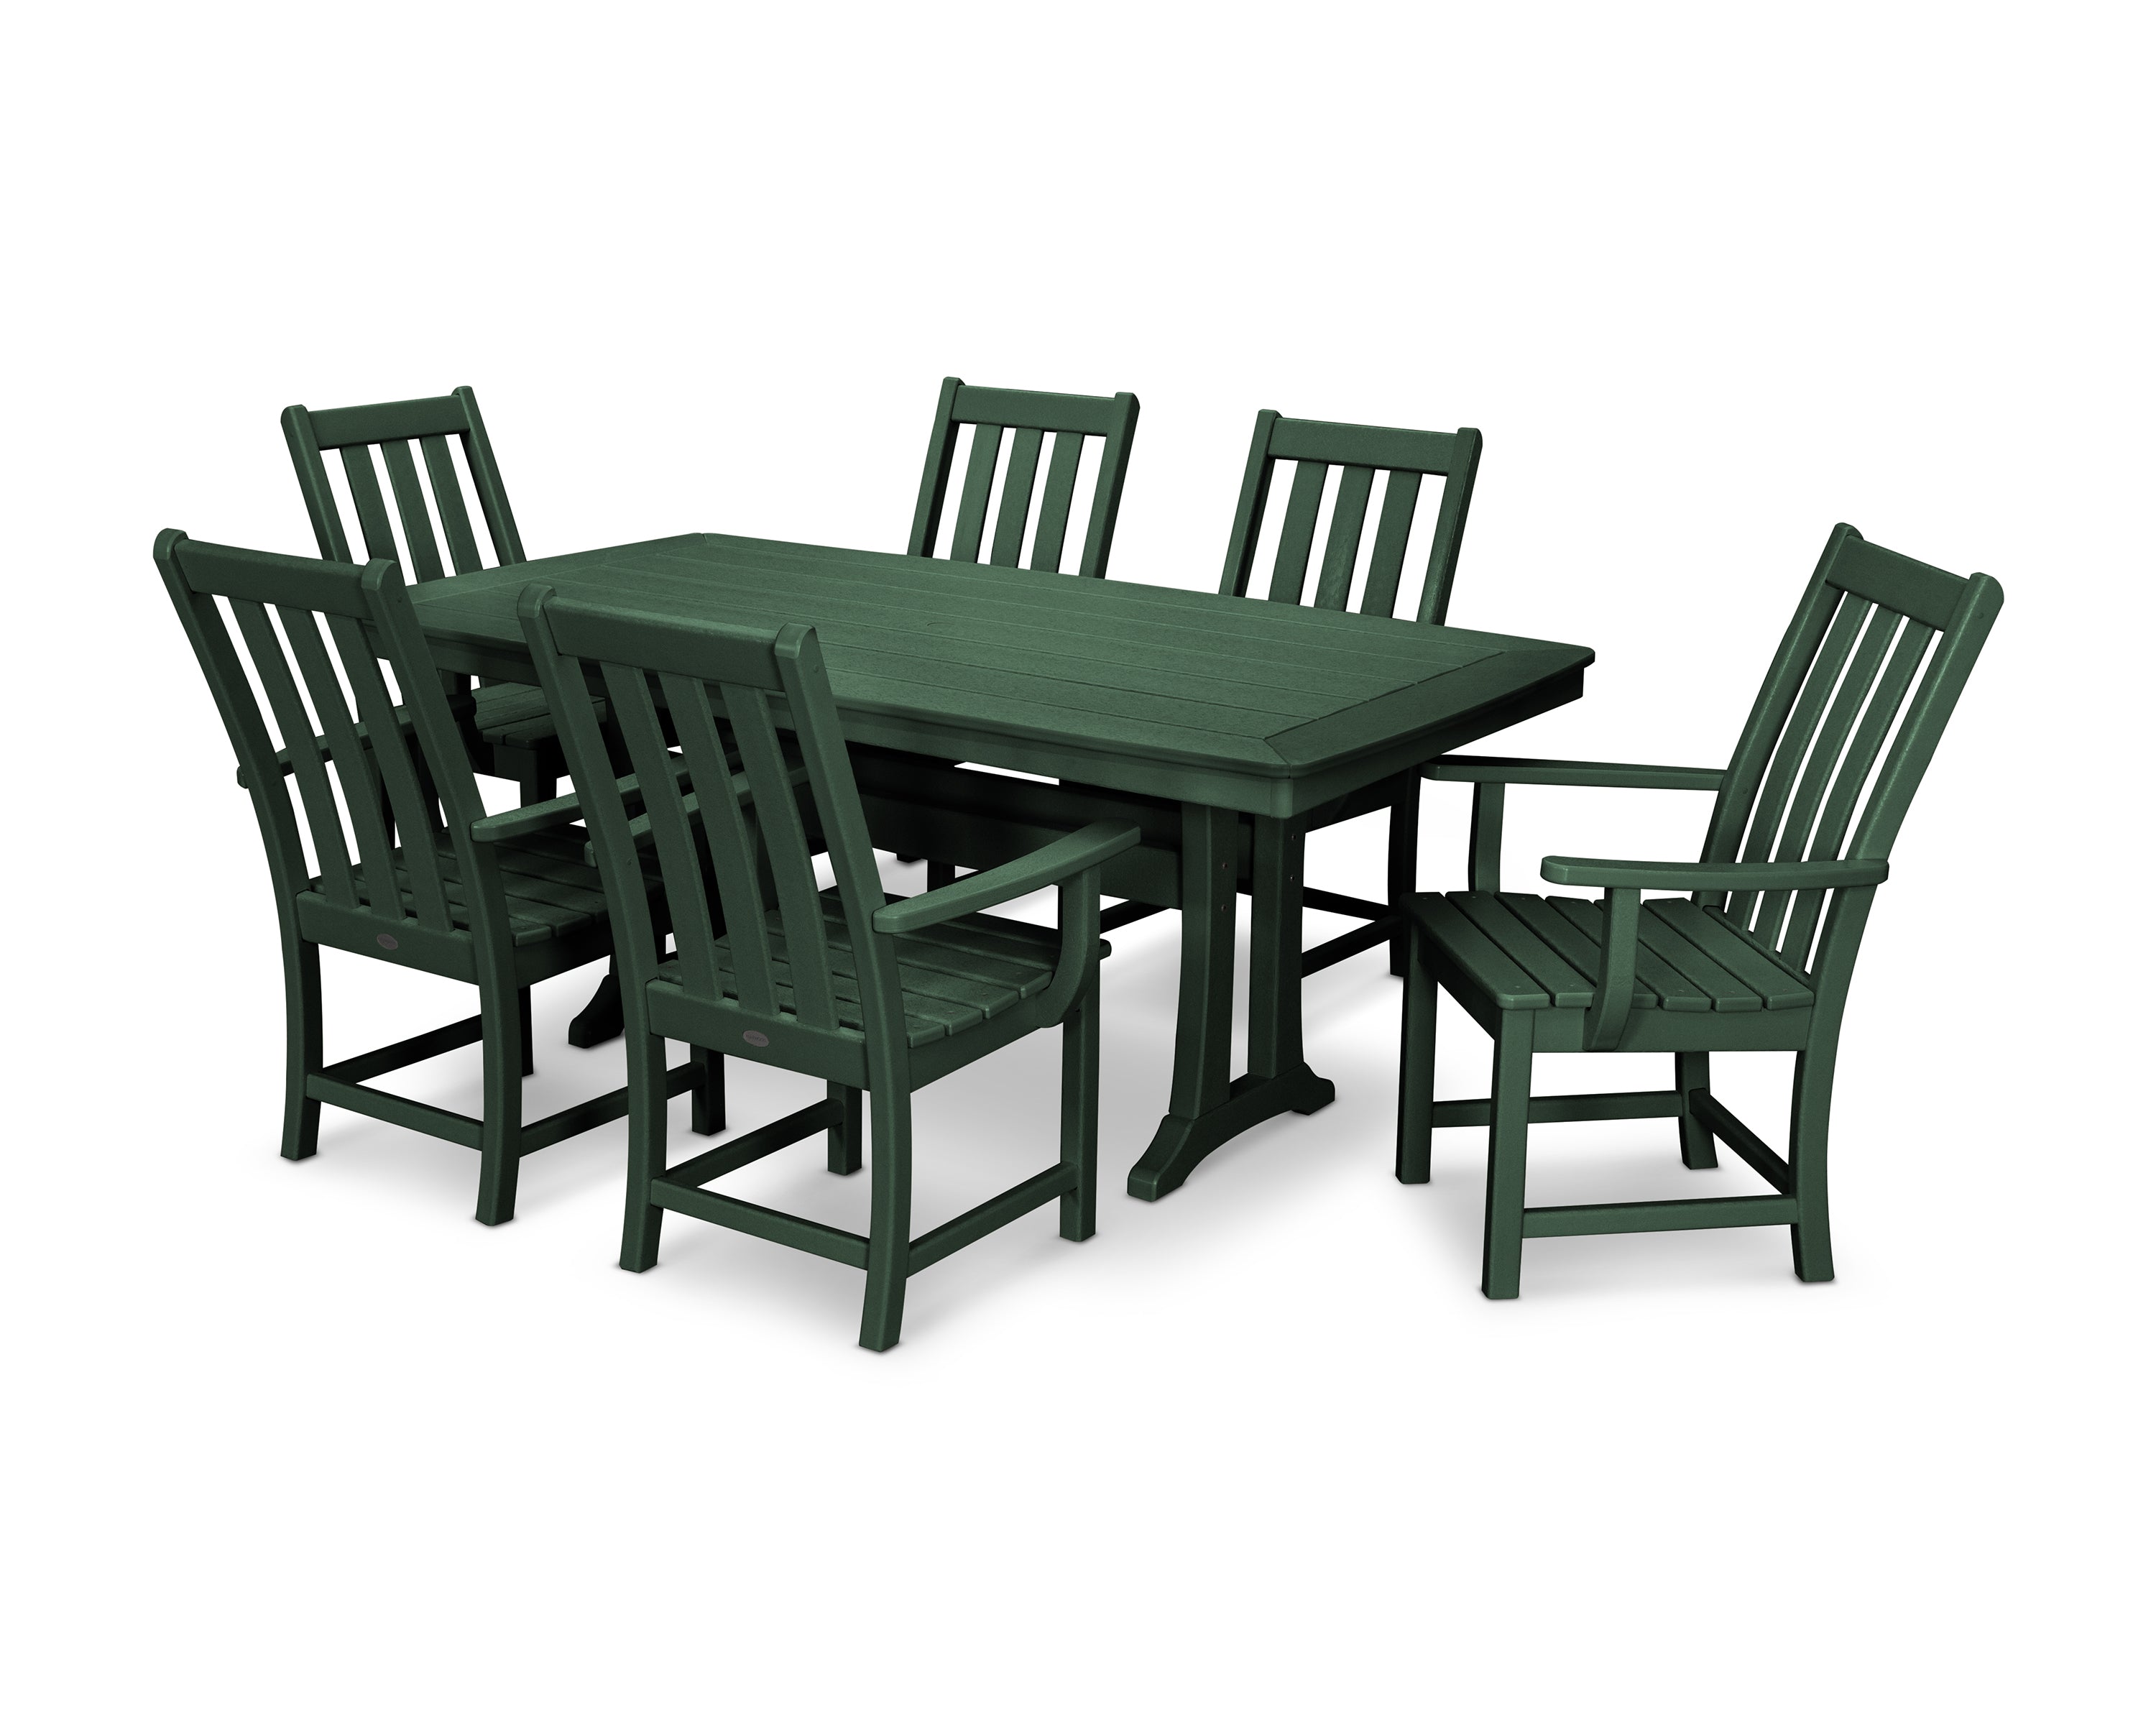 POLYWOOD® Vineyard 7-Piece Arm Chair Dining Set in Green